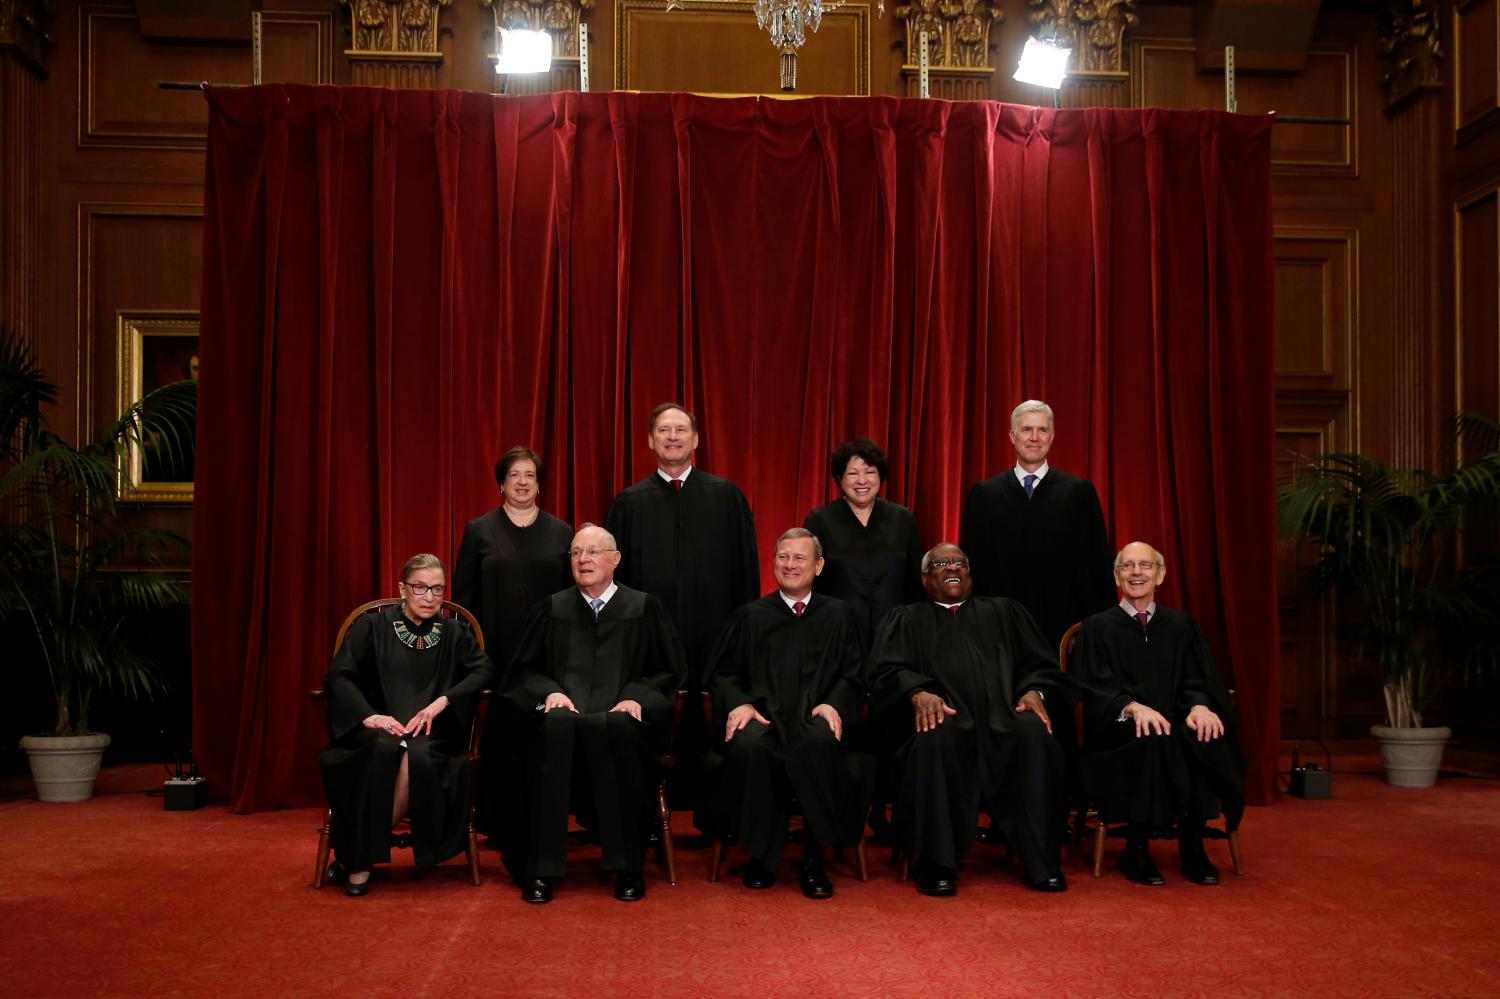 U.S. Chief Justice John Roberts (seated C) leads Justice Ruth Bader Ginsburg (front row, L-R), Justice Anthony Kennedy, Justice Clarence Thomas, Justice Stephen Breyer, Justice Elena Kagan (back row, L-R), Justice Samuel Alito, Justice Sonia Sotomayor, and Justice Neil Gorsuch in taking a new family photo including Gorsuch, their most recent addition, at the Supreme Court building in Washington, D.C, U.S., June 1, 2017. REUTERS/Jonathan Ernst - RC1263640740